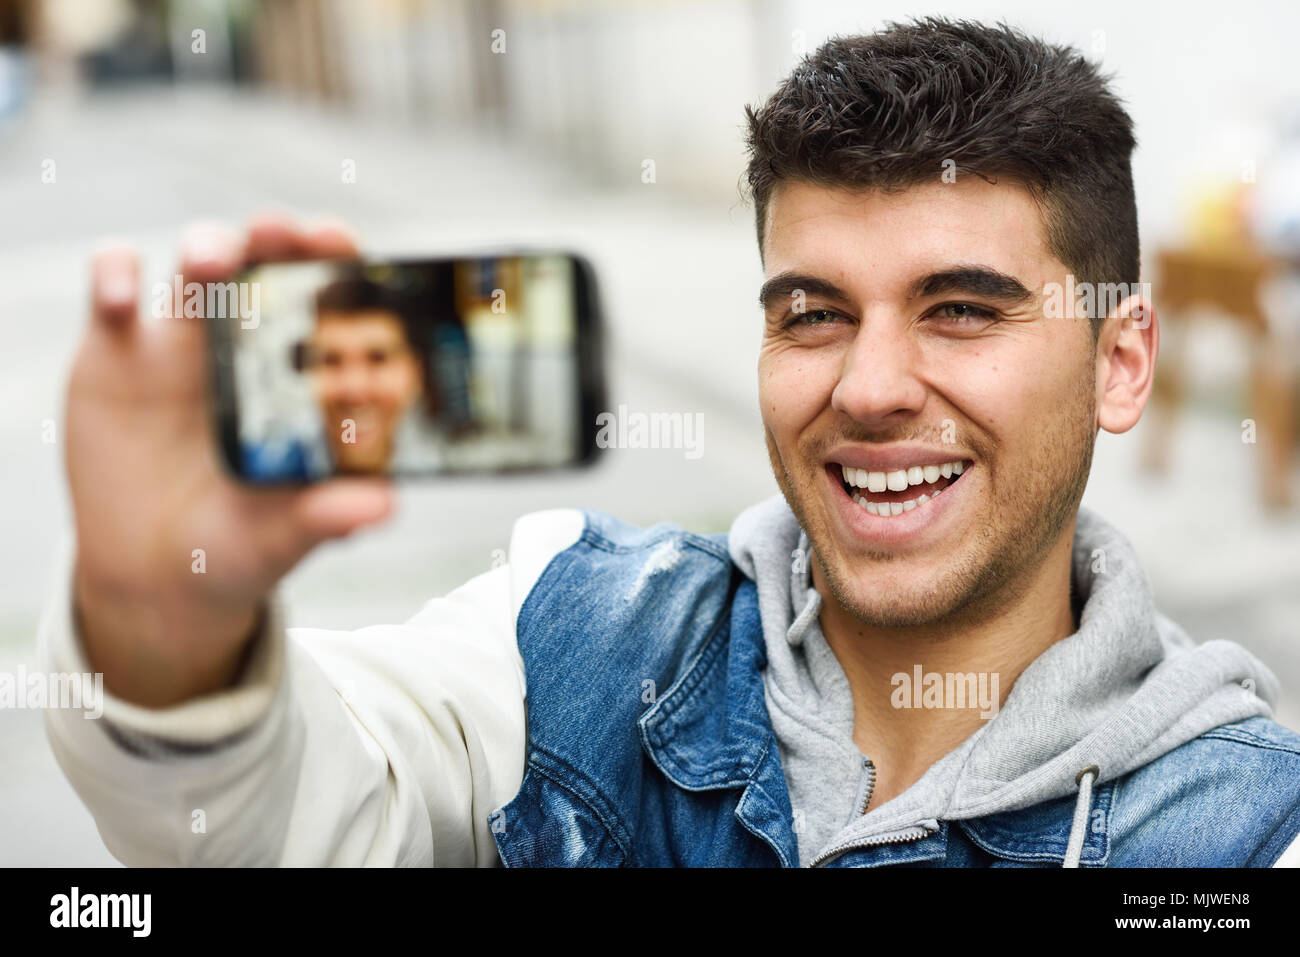 Handsome young man selfie in urban background with a smartphone wearing casual clothes Stock Photo